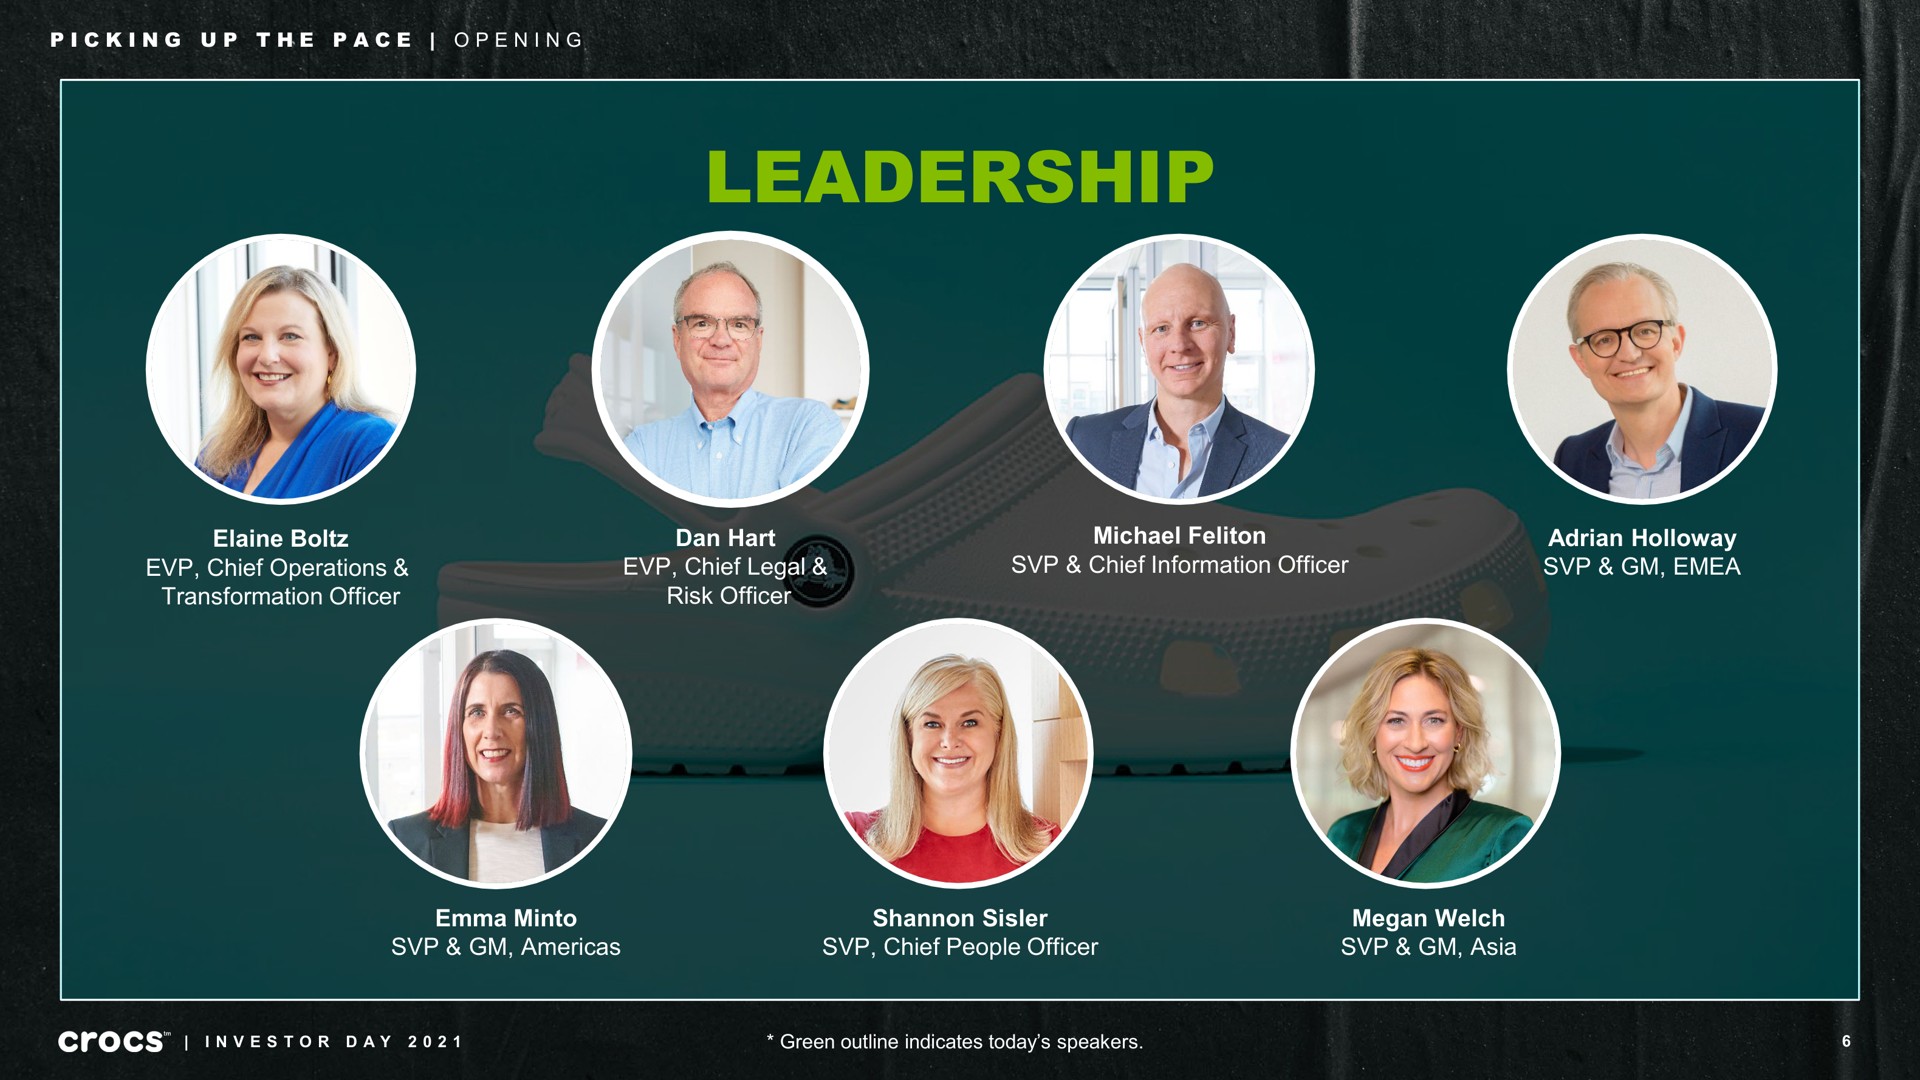 leadership elaine chief operations transformation officer dan hart chief legal risk officer chief information officer emma chief people officer picking up the pace opening in day green outline indicates today speakers | Crocs